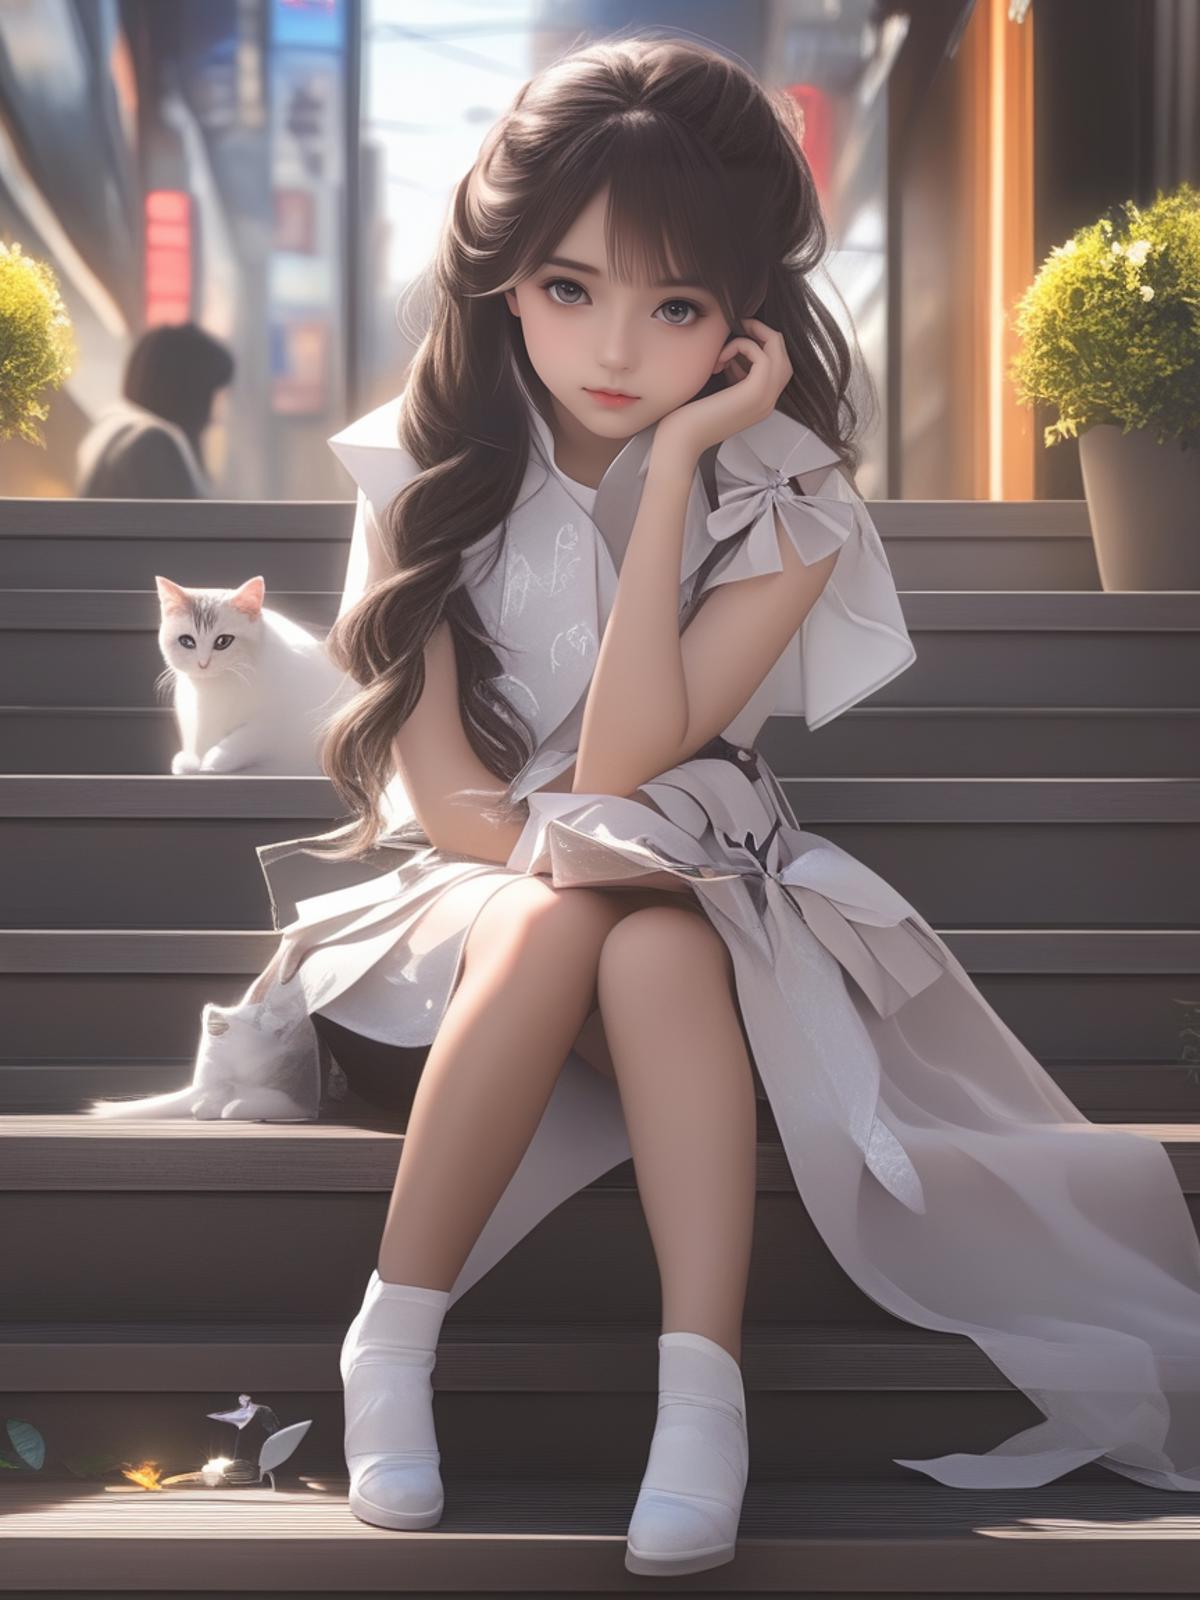 A woman and a cat sitting on stairs in a white dress.